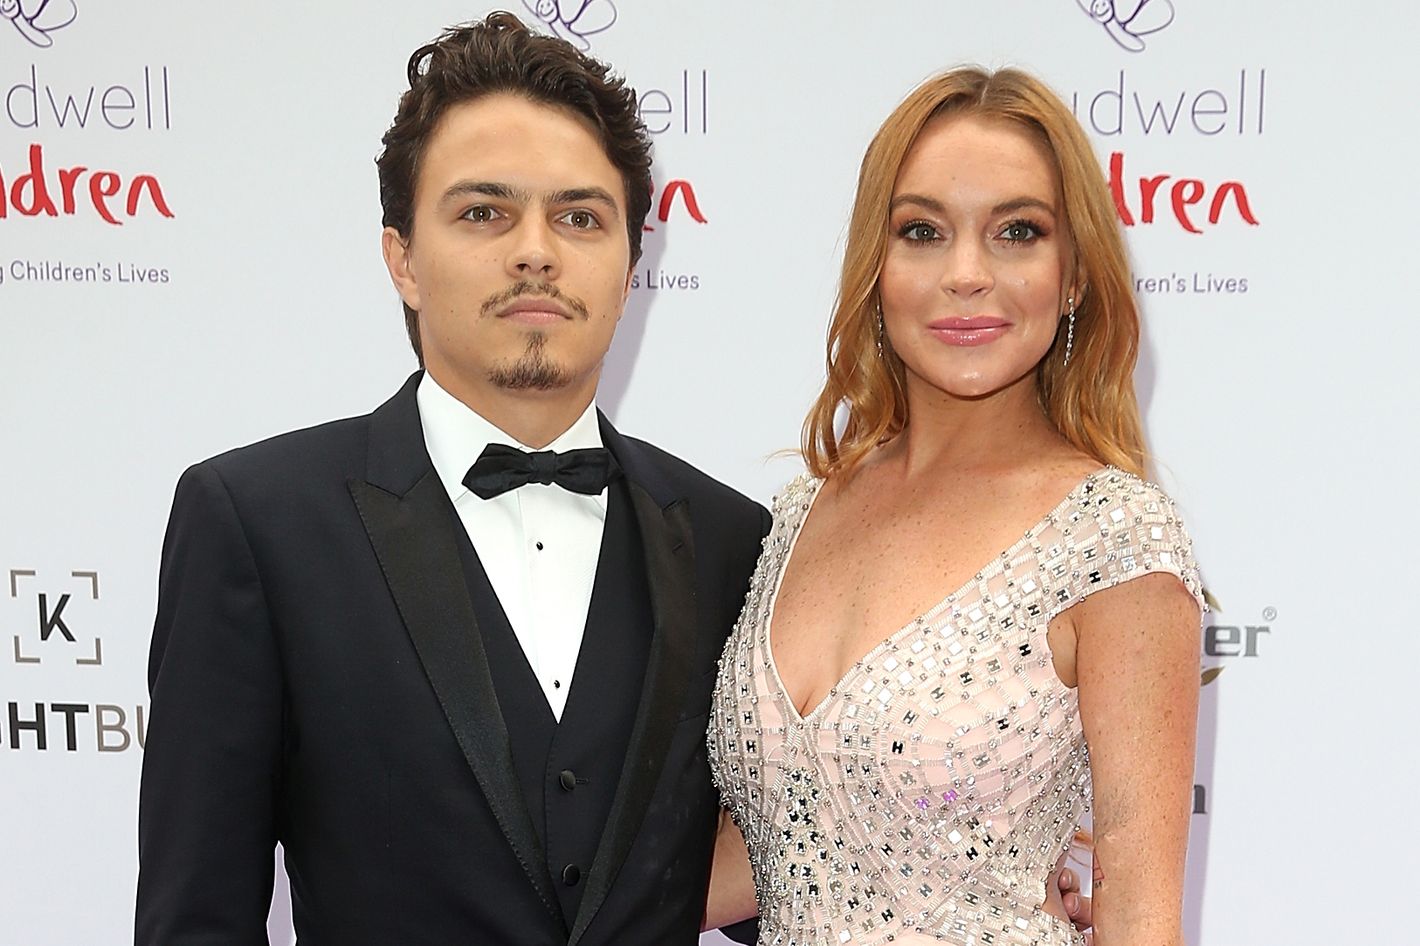 Lindsay Lohan Splits From Fiancé, Posts Meaningful Instagram Pics